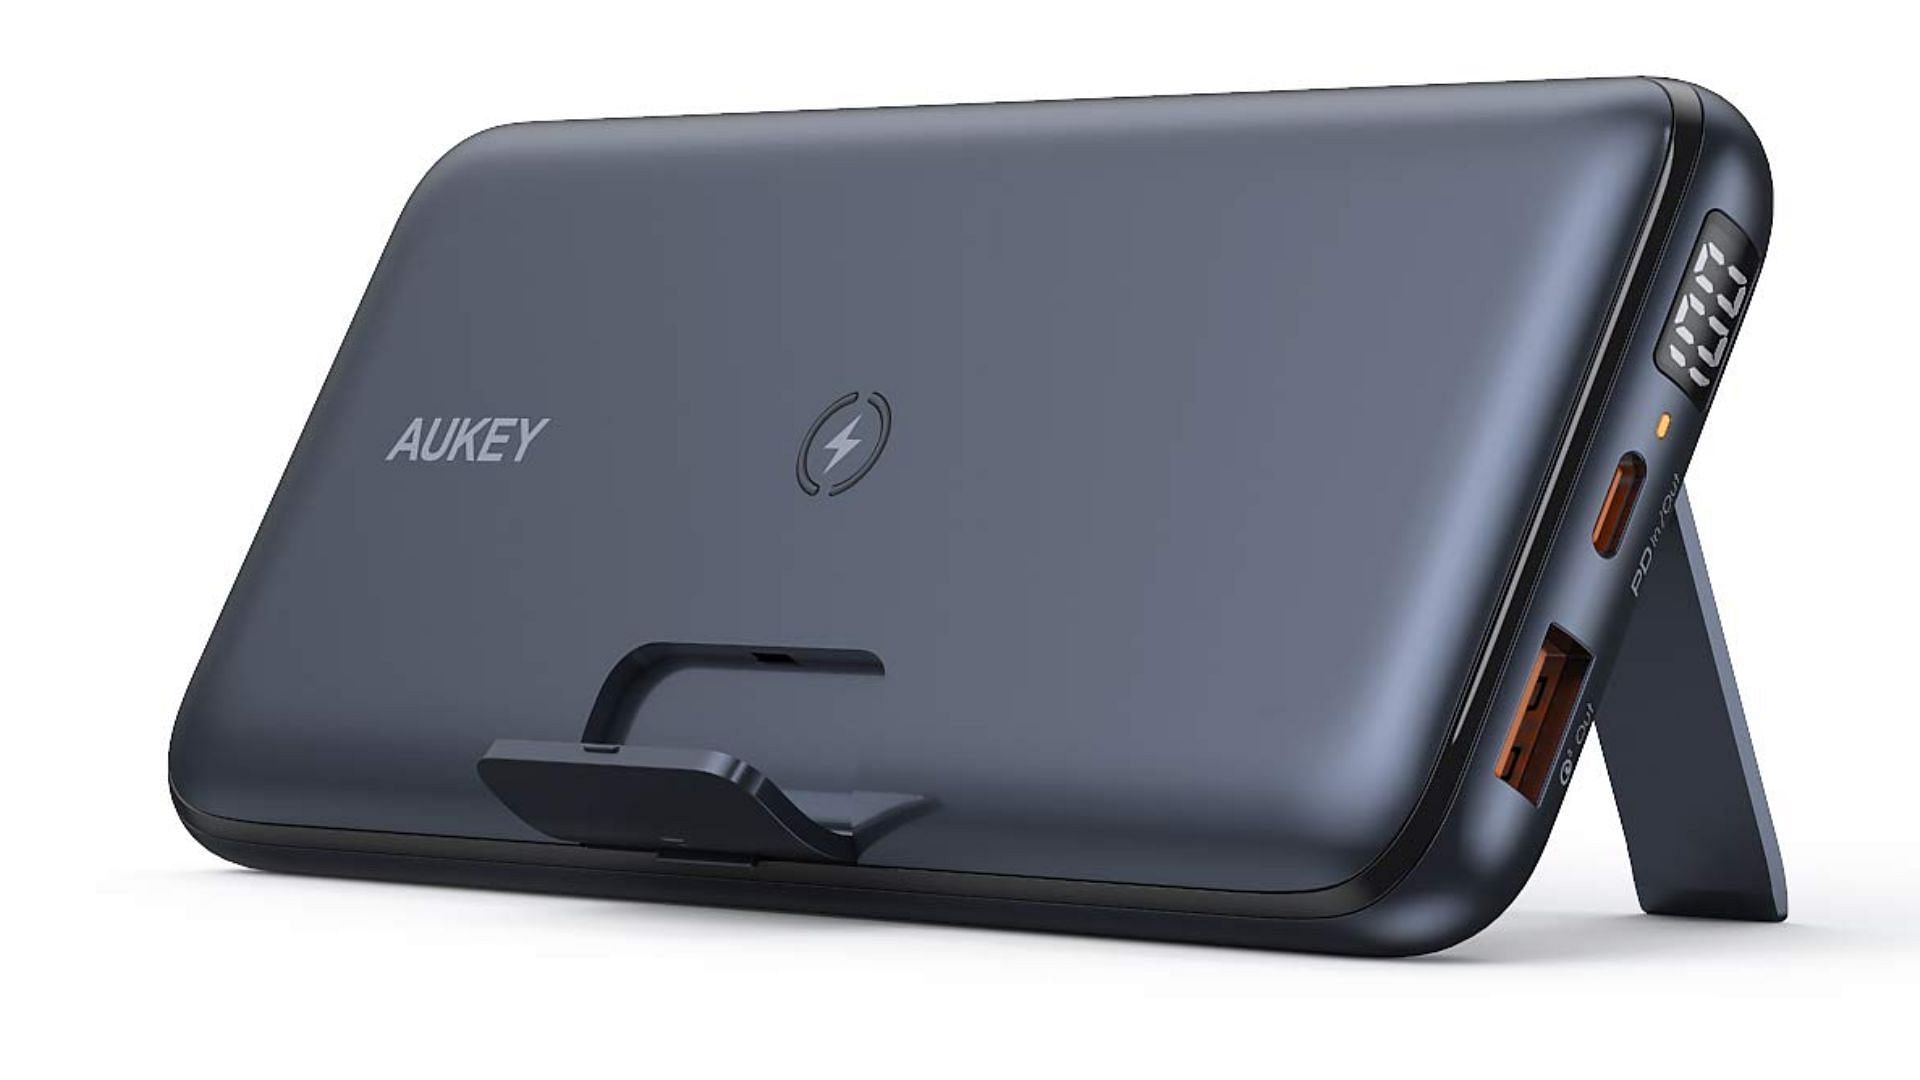 The Aukey Wireless Power Bank 20,000 mAh with 18W Power Delivery (Image via DesertCart)